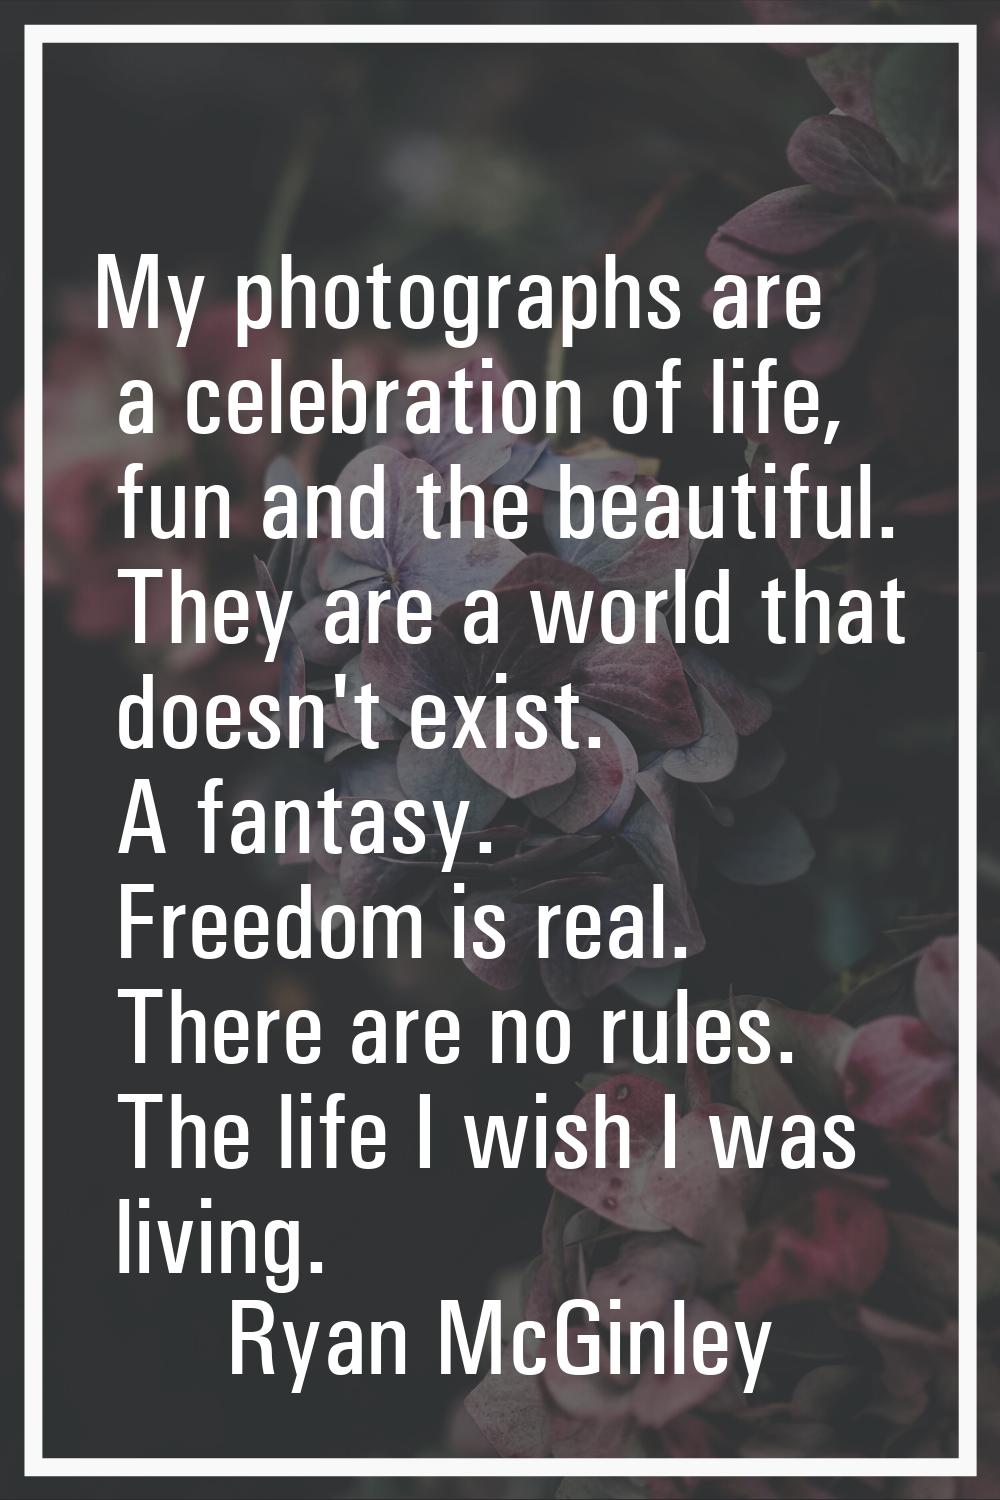 My photographs are a celebration of life, fun and the beautiful. They are a world that doesn't exis